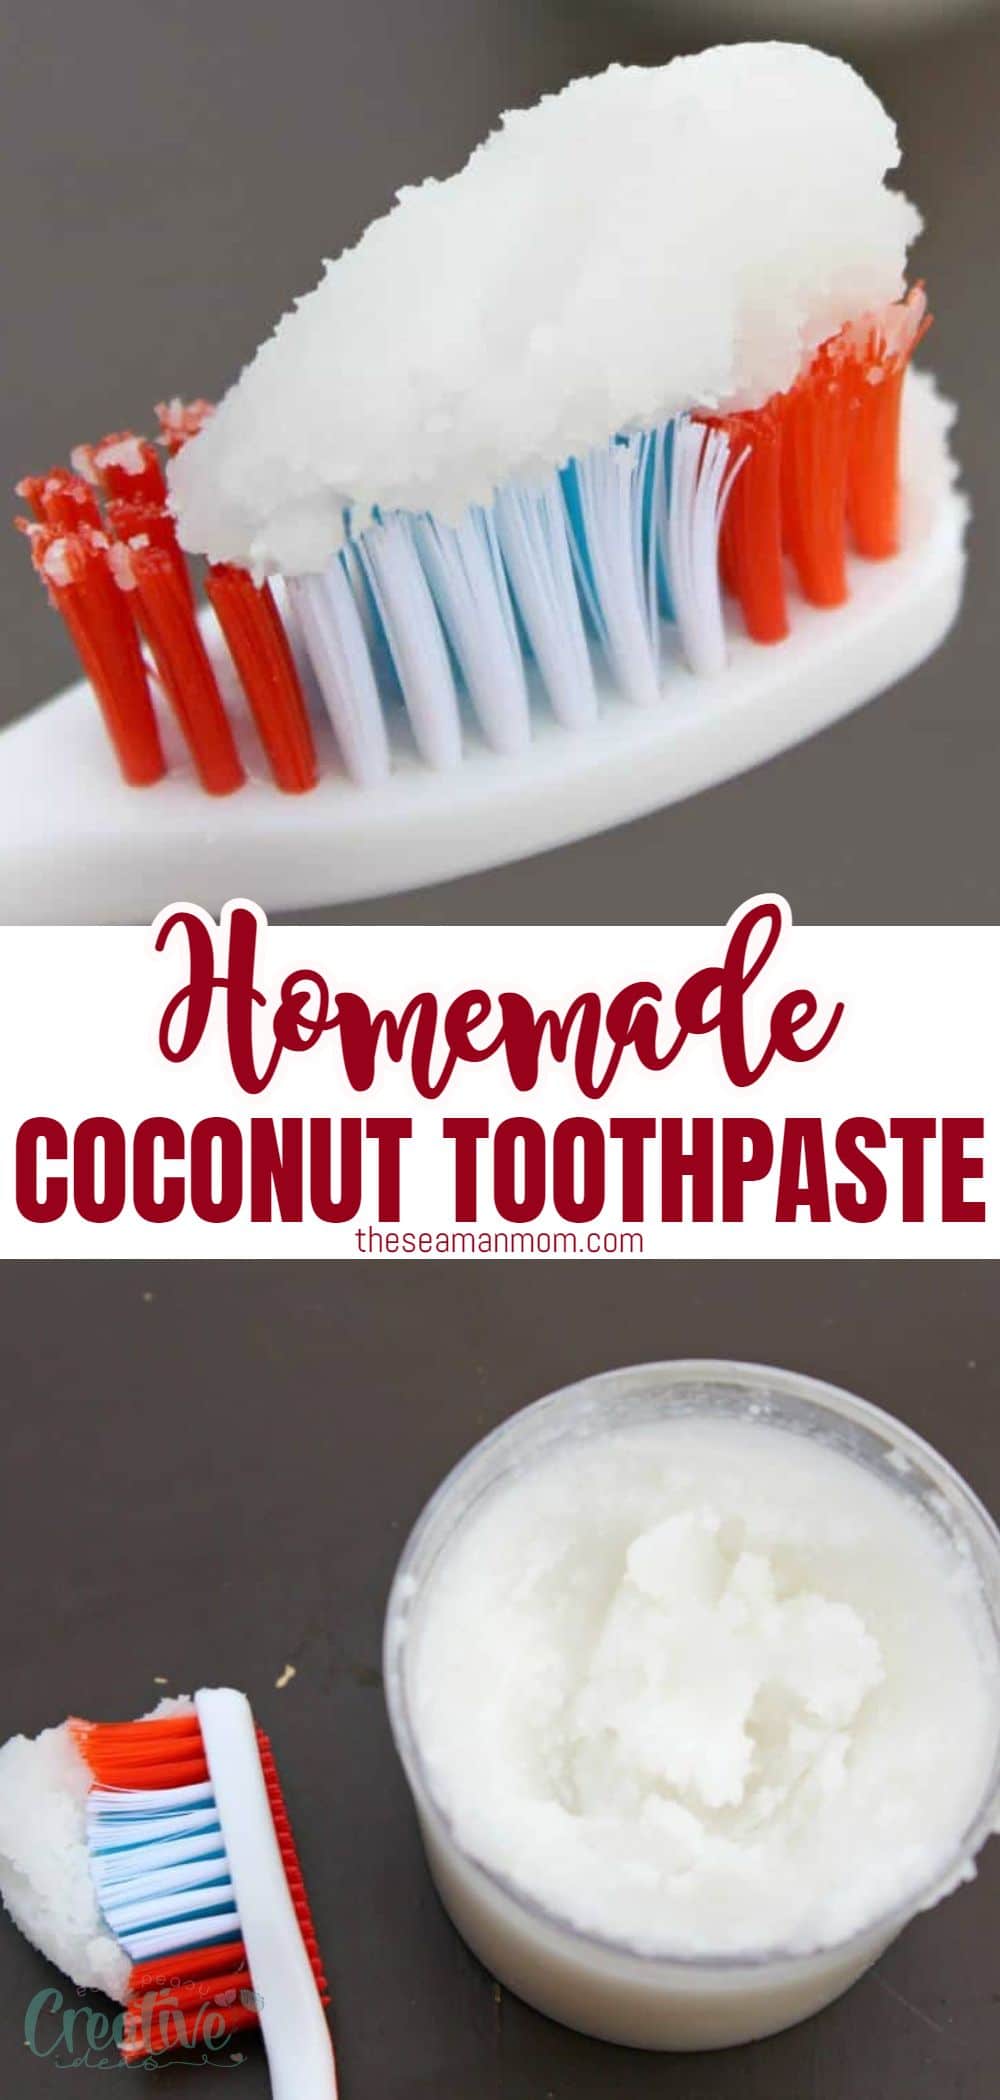 This homemade coconut oil toothpaste recipe is simple and fun to prepare and also much safer and healthier for your teeth. Perfect product to add to your selfcare and beauty arsenal if you're looking to lead a greener lifestyle!  via @petroneagu